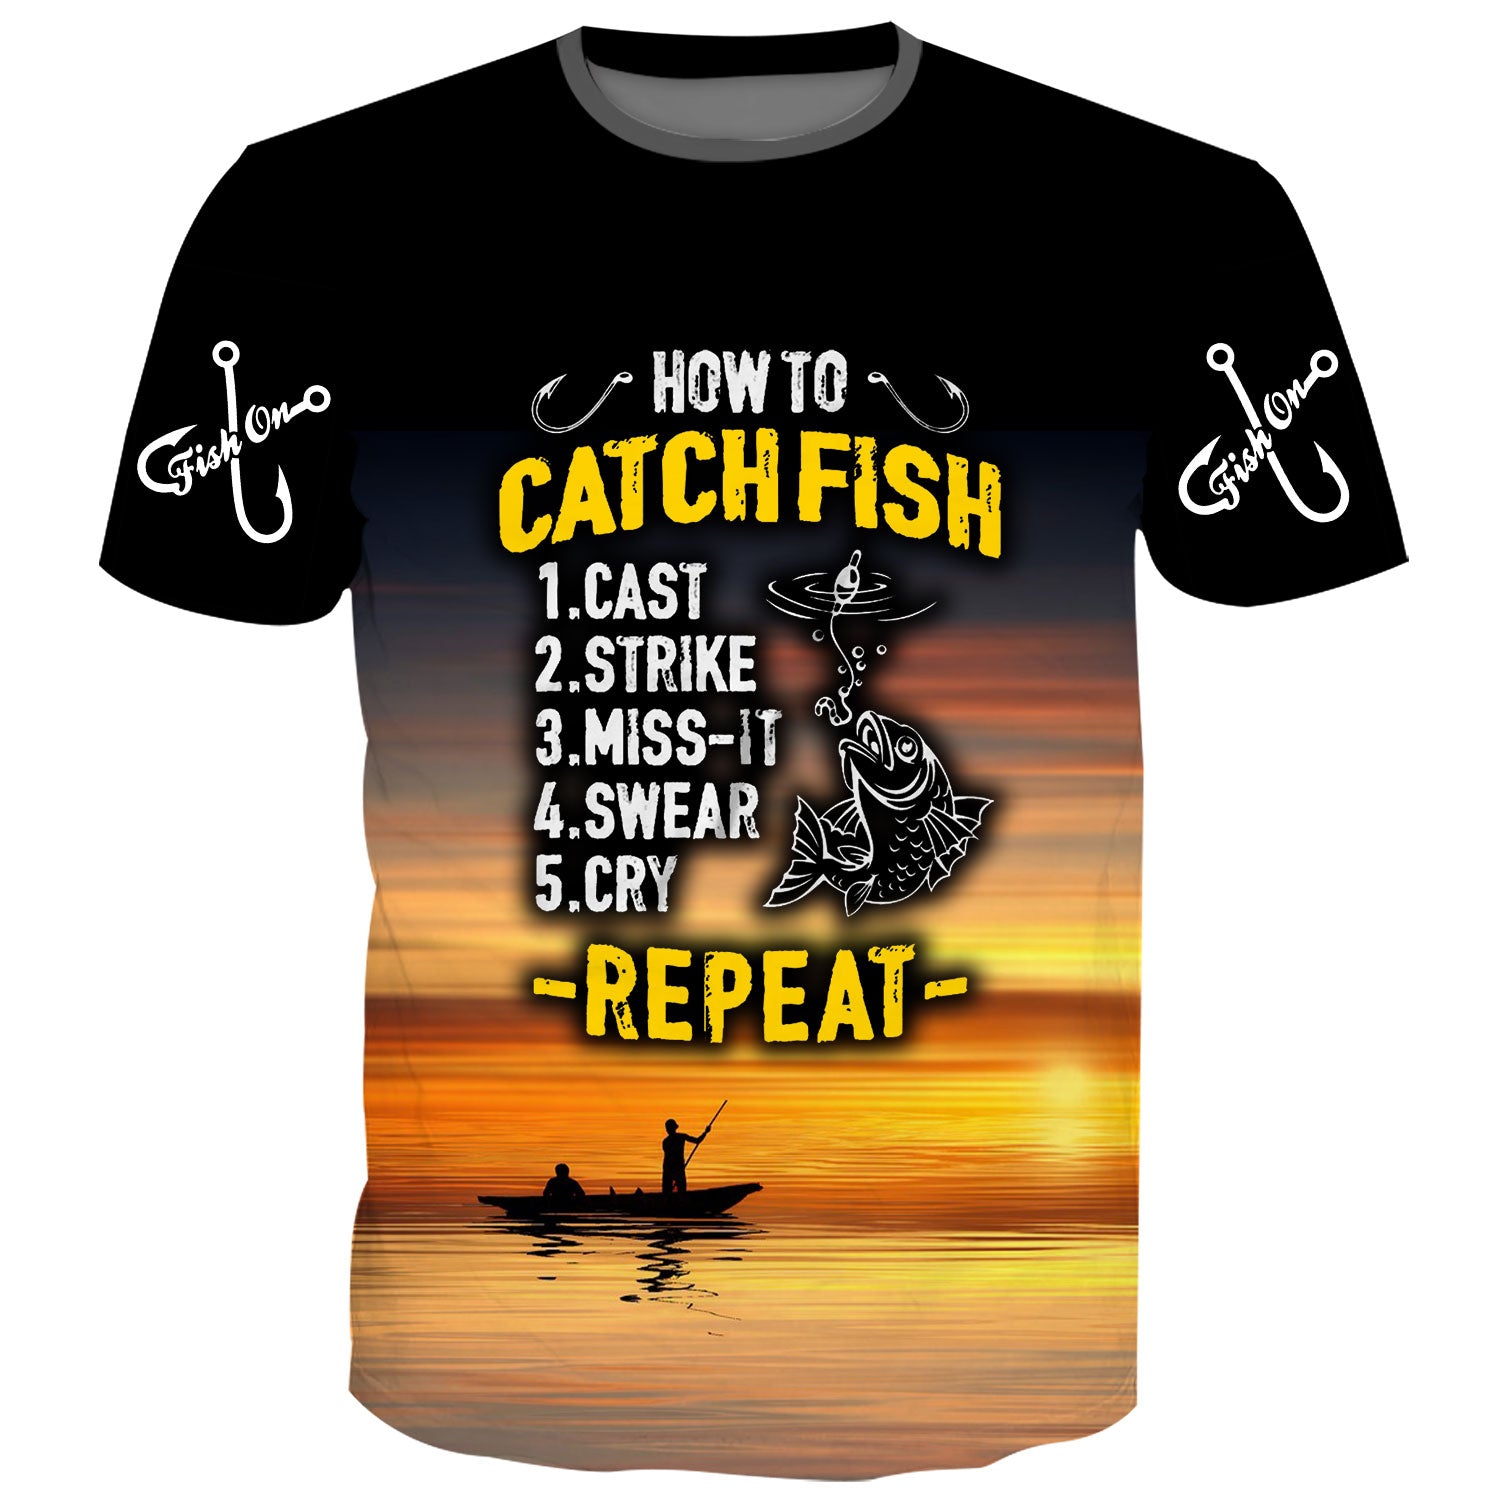 How to Catch a Fish - T-Shirt